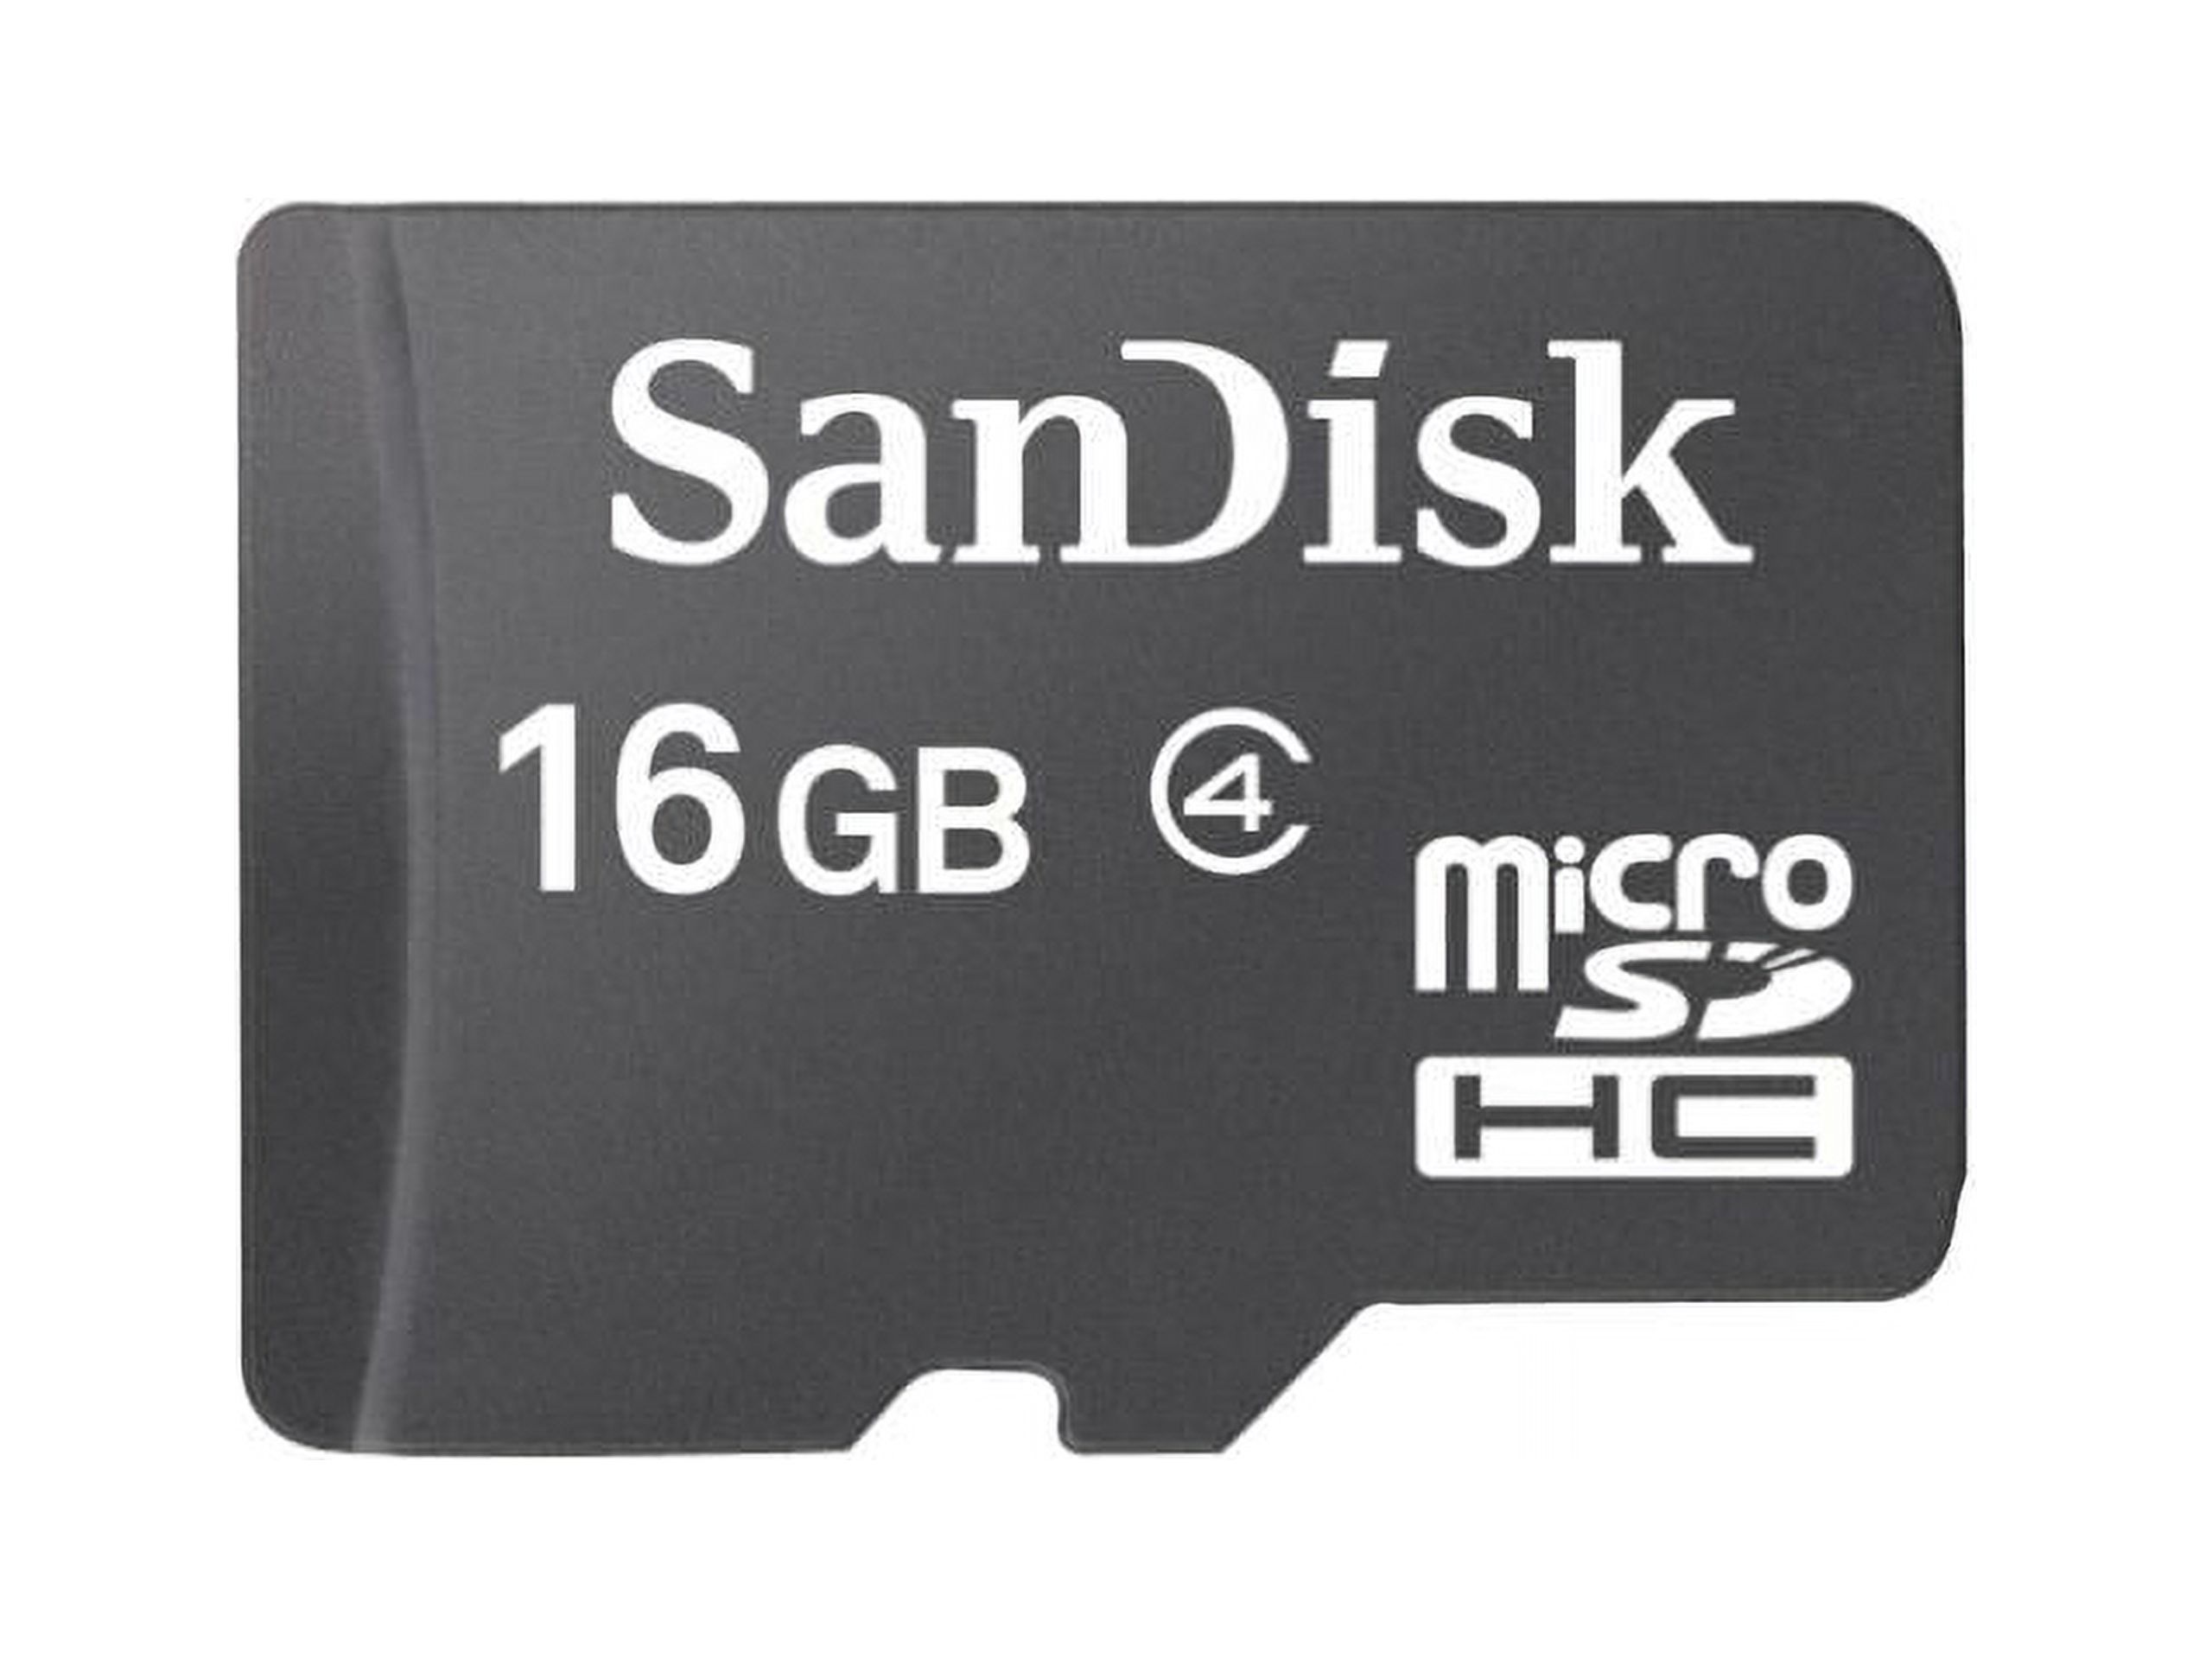 SanDisk 16GB Class 4 MicroSDHC Memory Card with Adapter - image 1 of 5